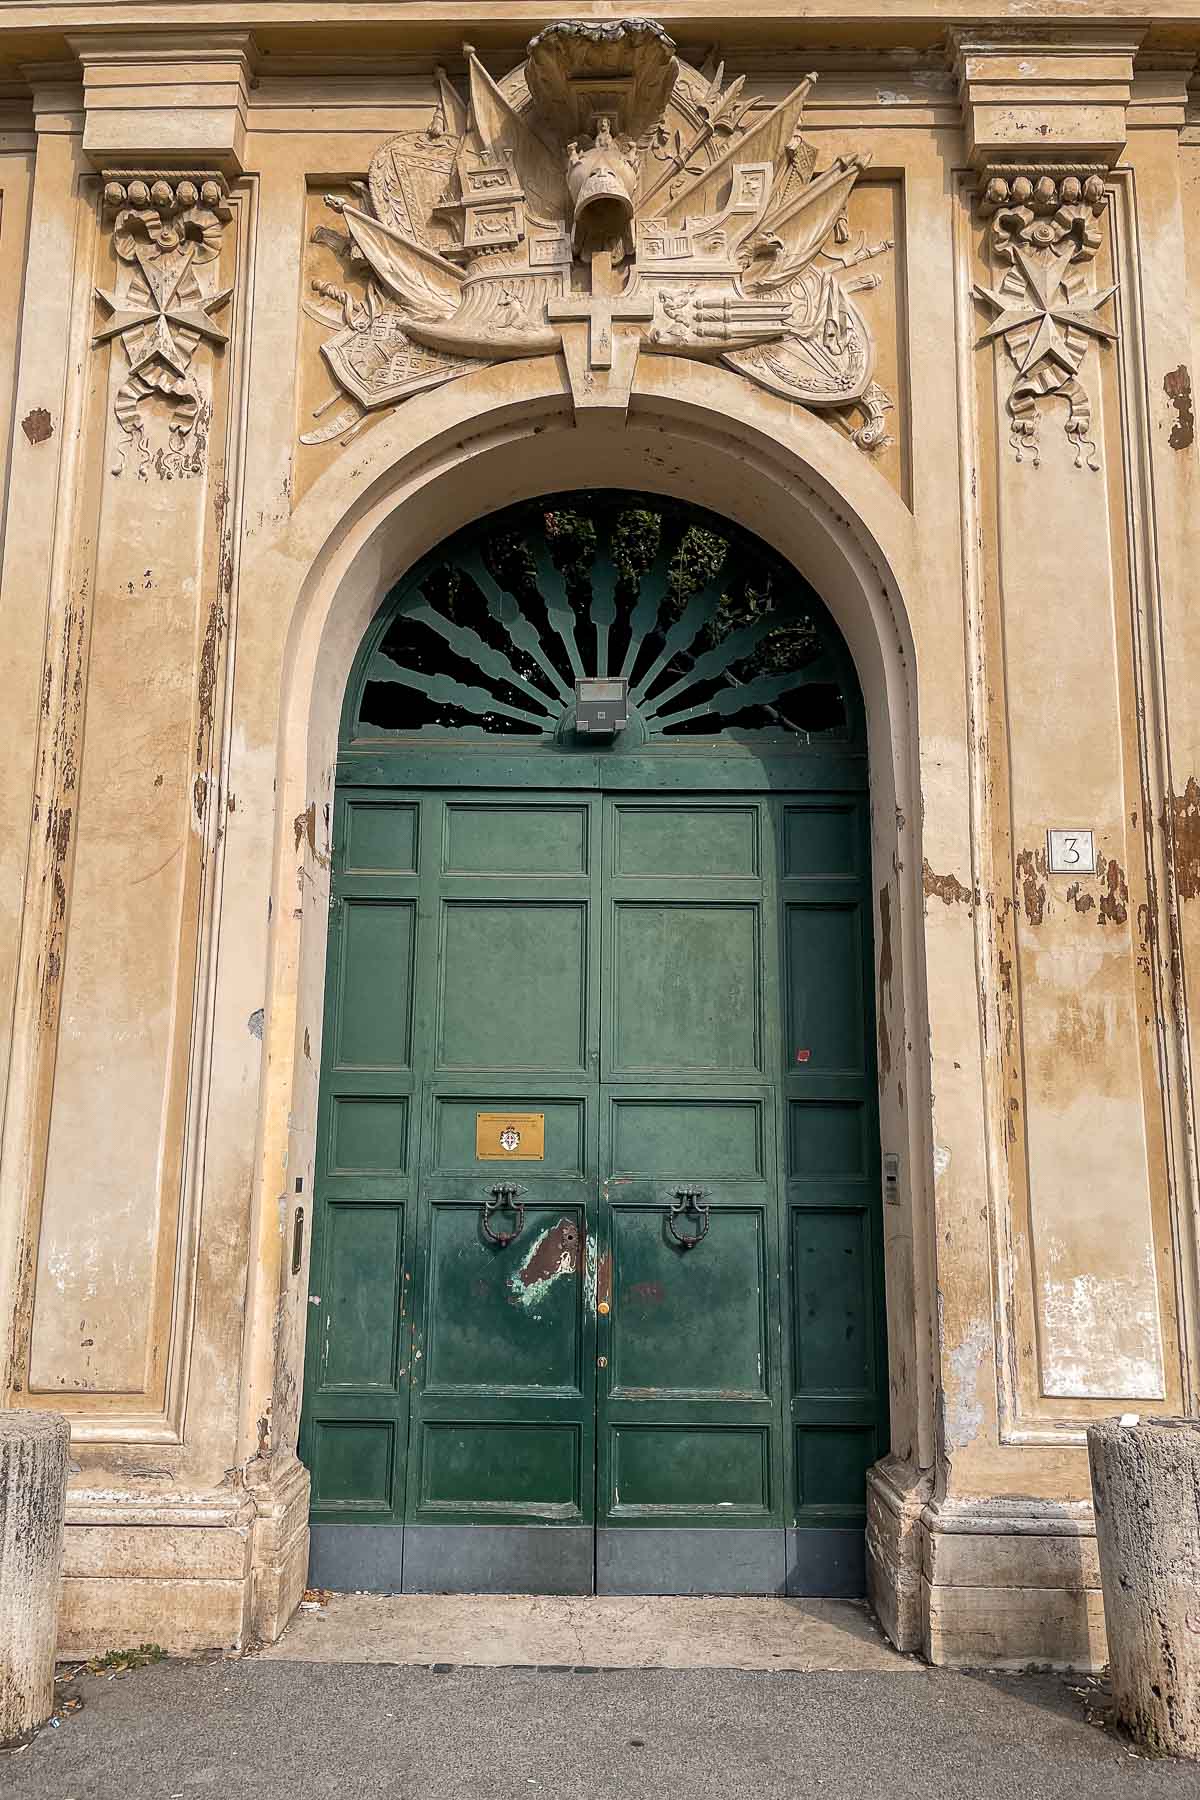 The door of the Aventine Keyhole in Rome, Italy